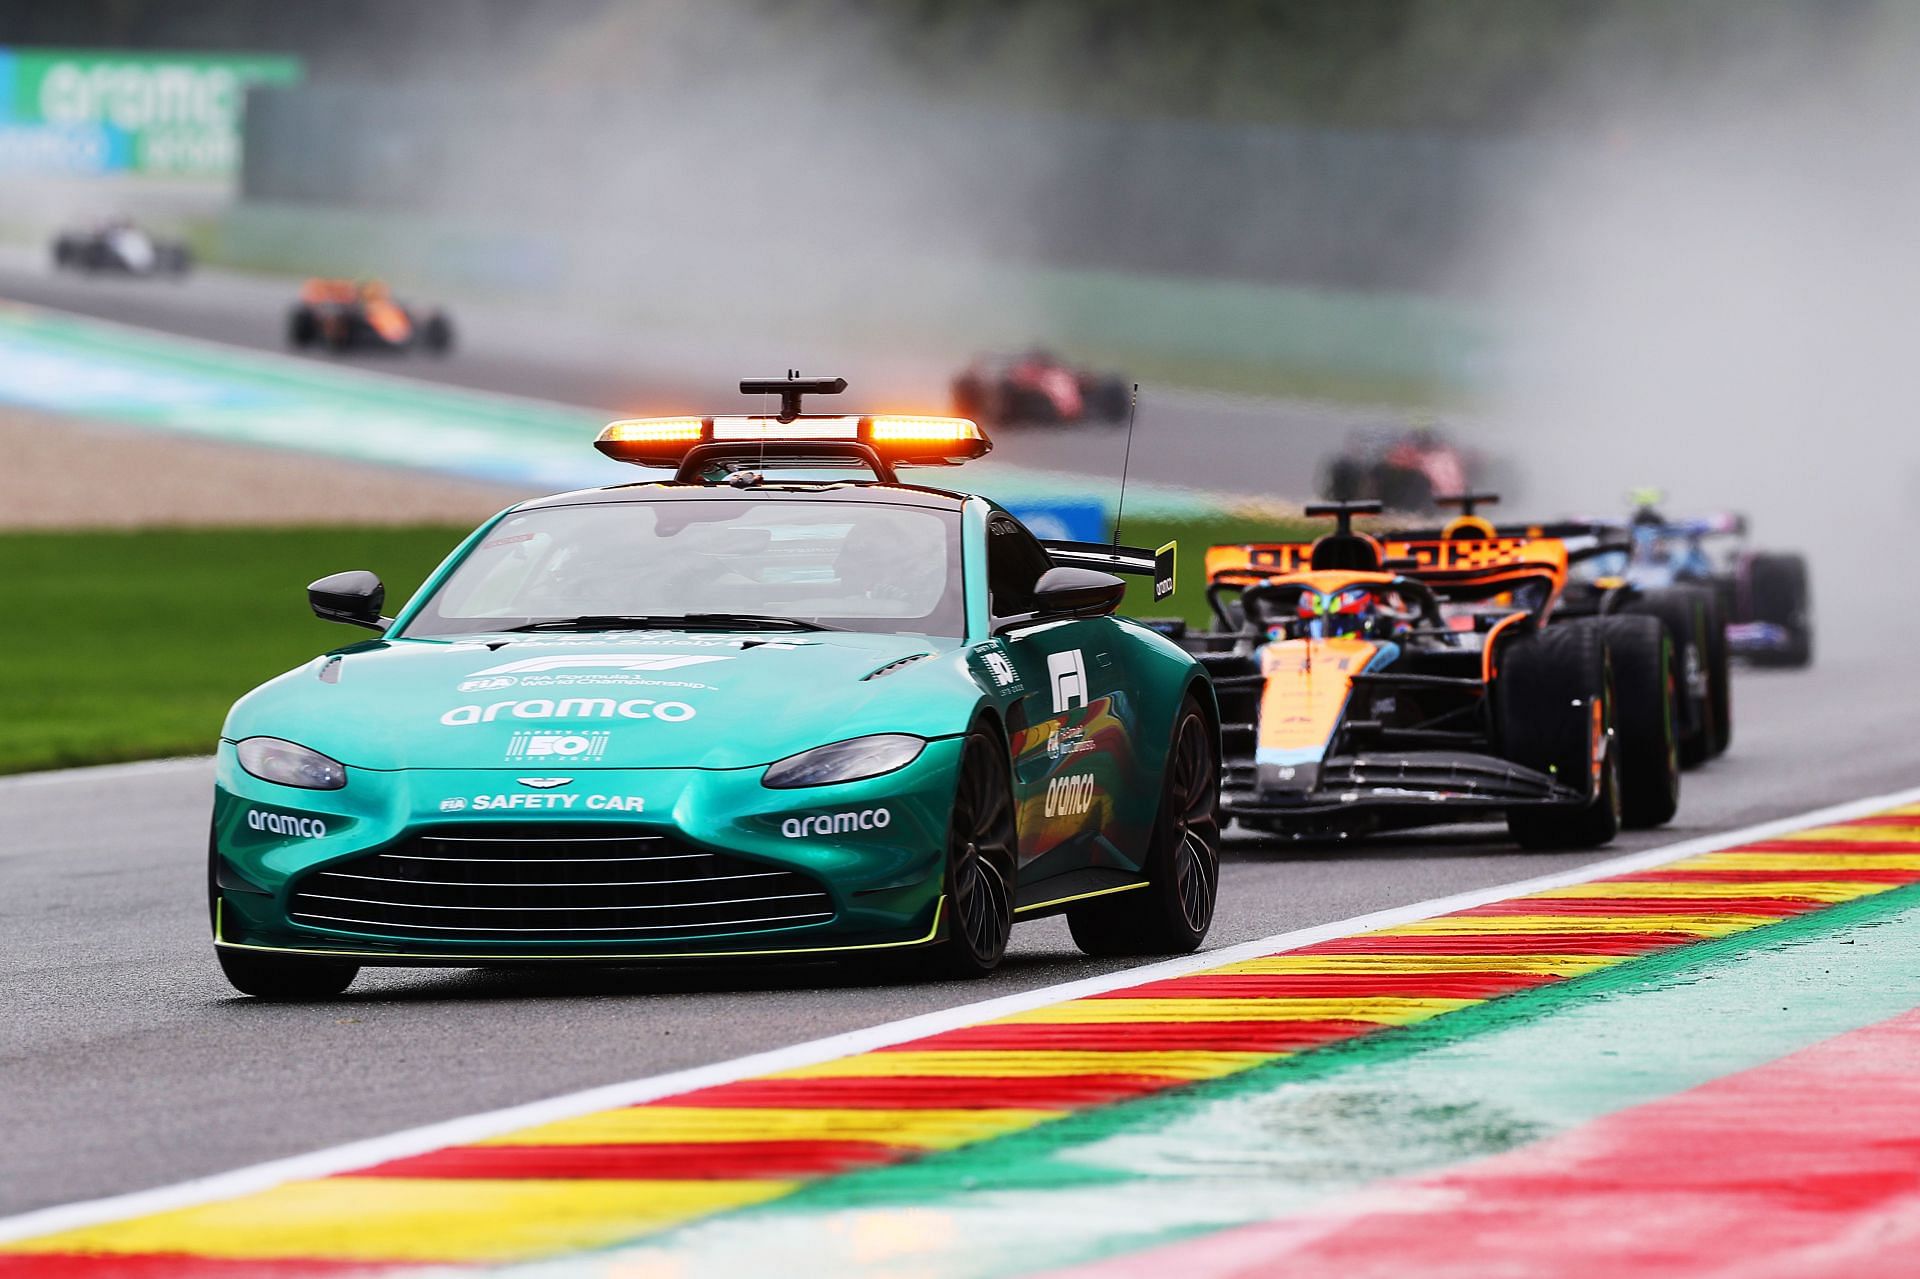 Start of the 2023 Belgian Grand Prix Sprint behind the safety car (Photo by Peter Fox/Getty Images)